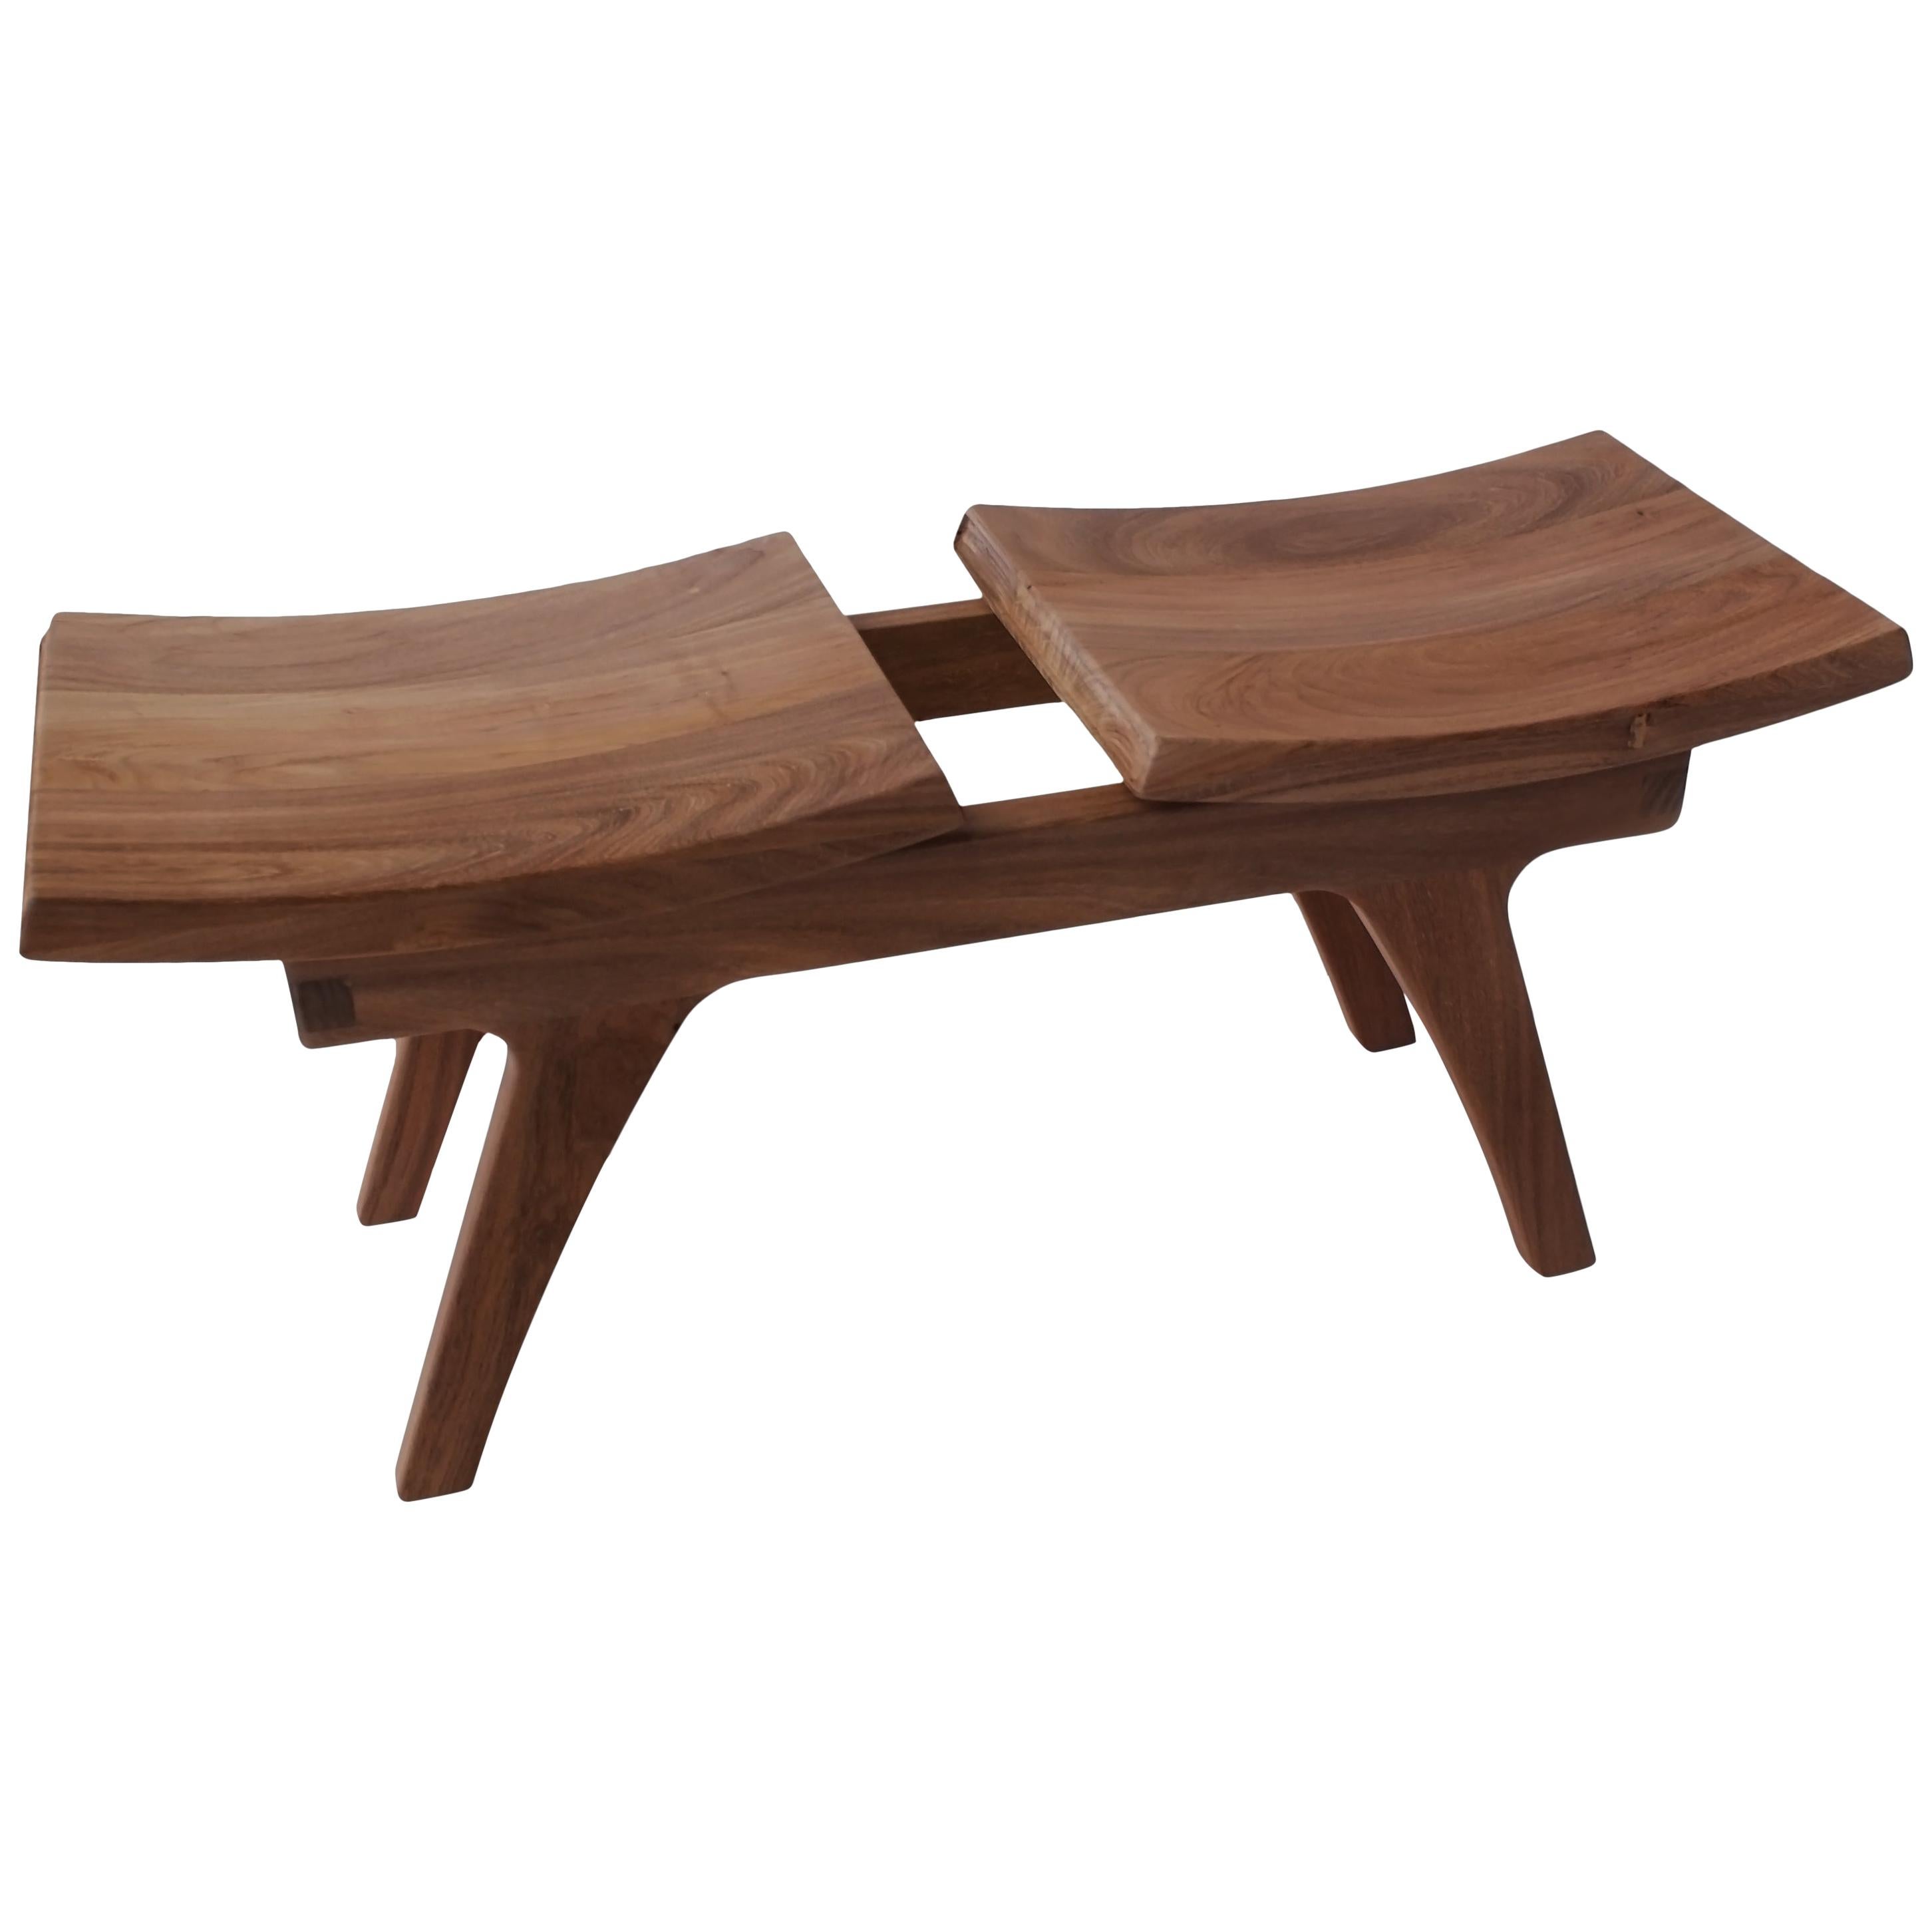 Tripot, Solid Walnut Wood Bench, Stool with Two Seats